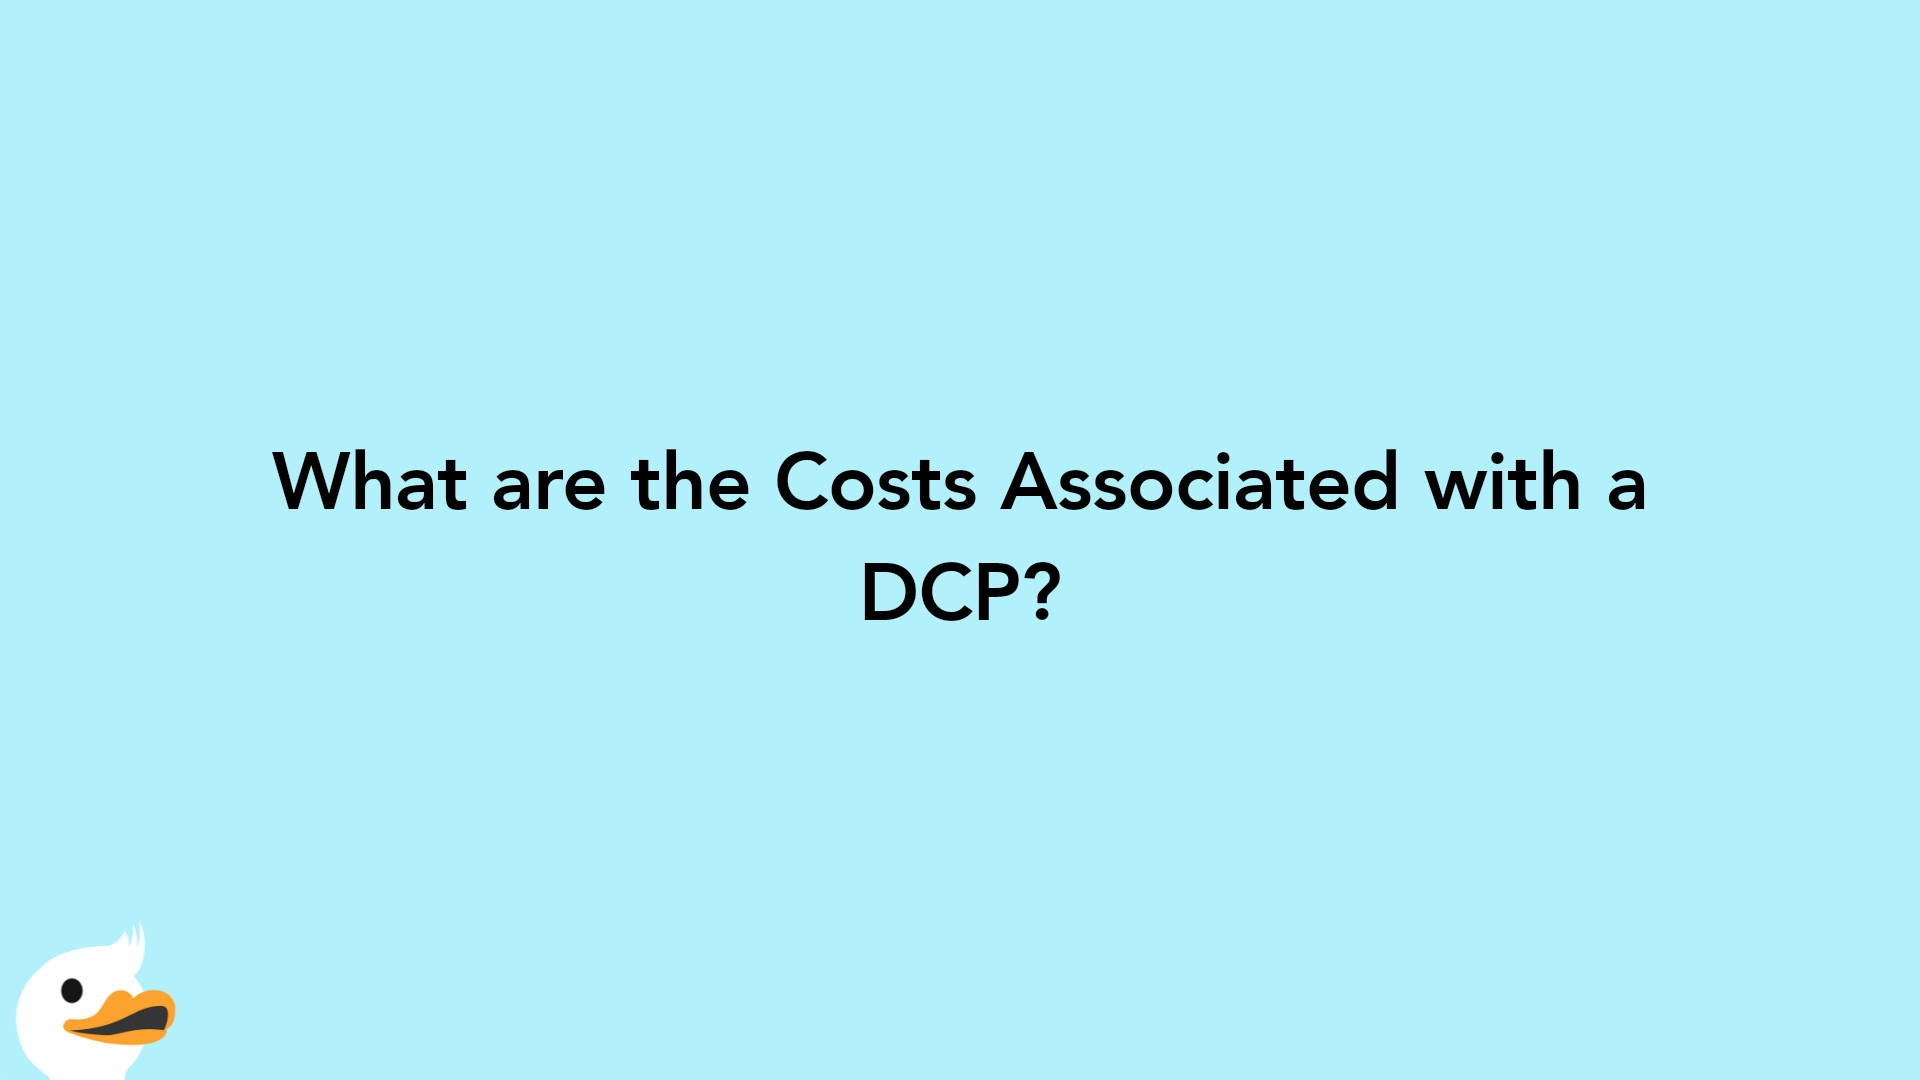 What are the Costs Associated with a DCP?